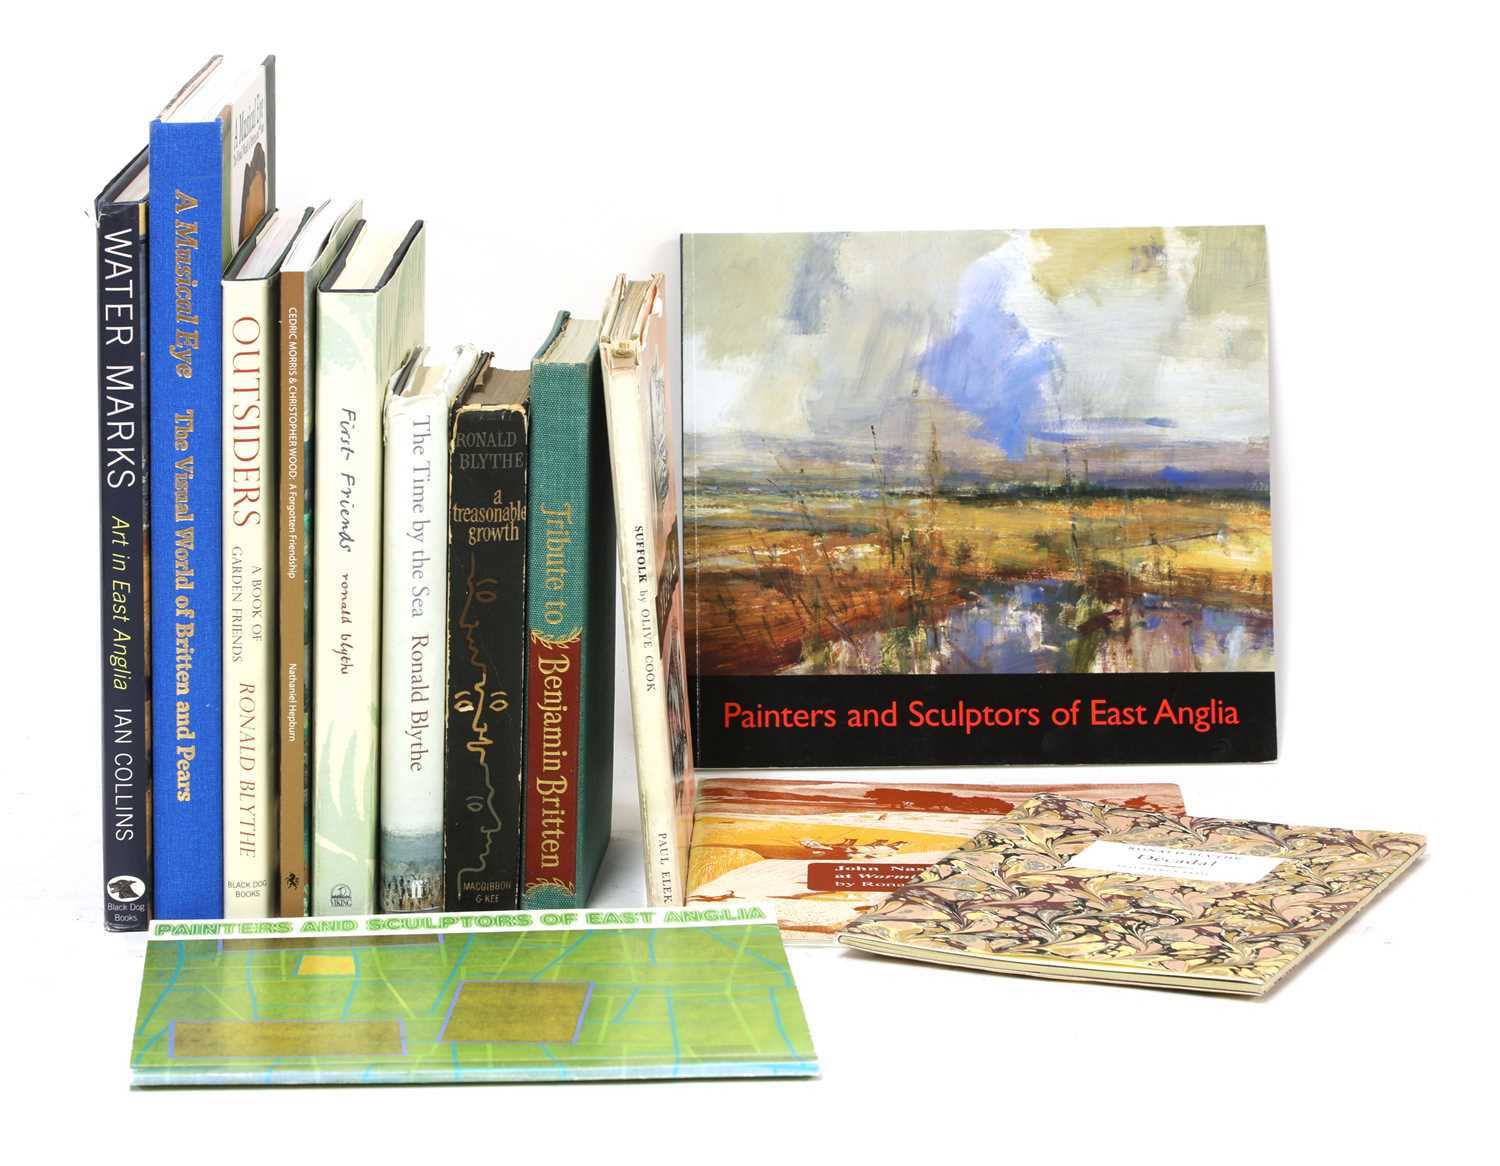 Lot 22 - Thirteen books on East Anglian artists and composers